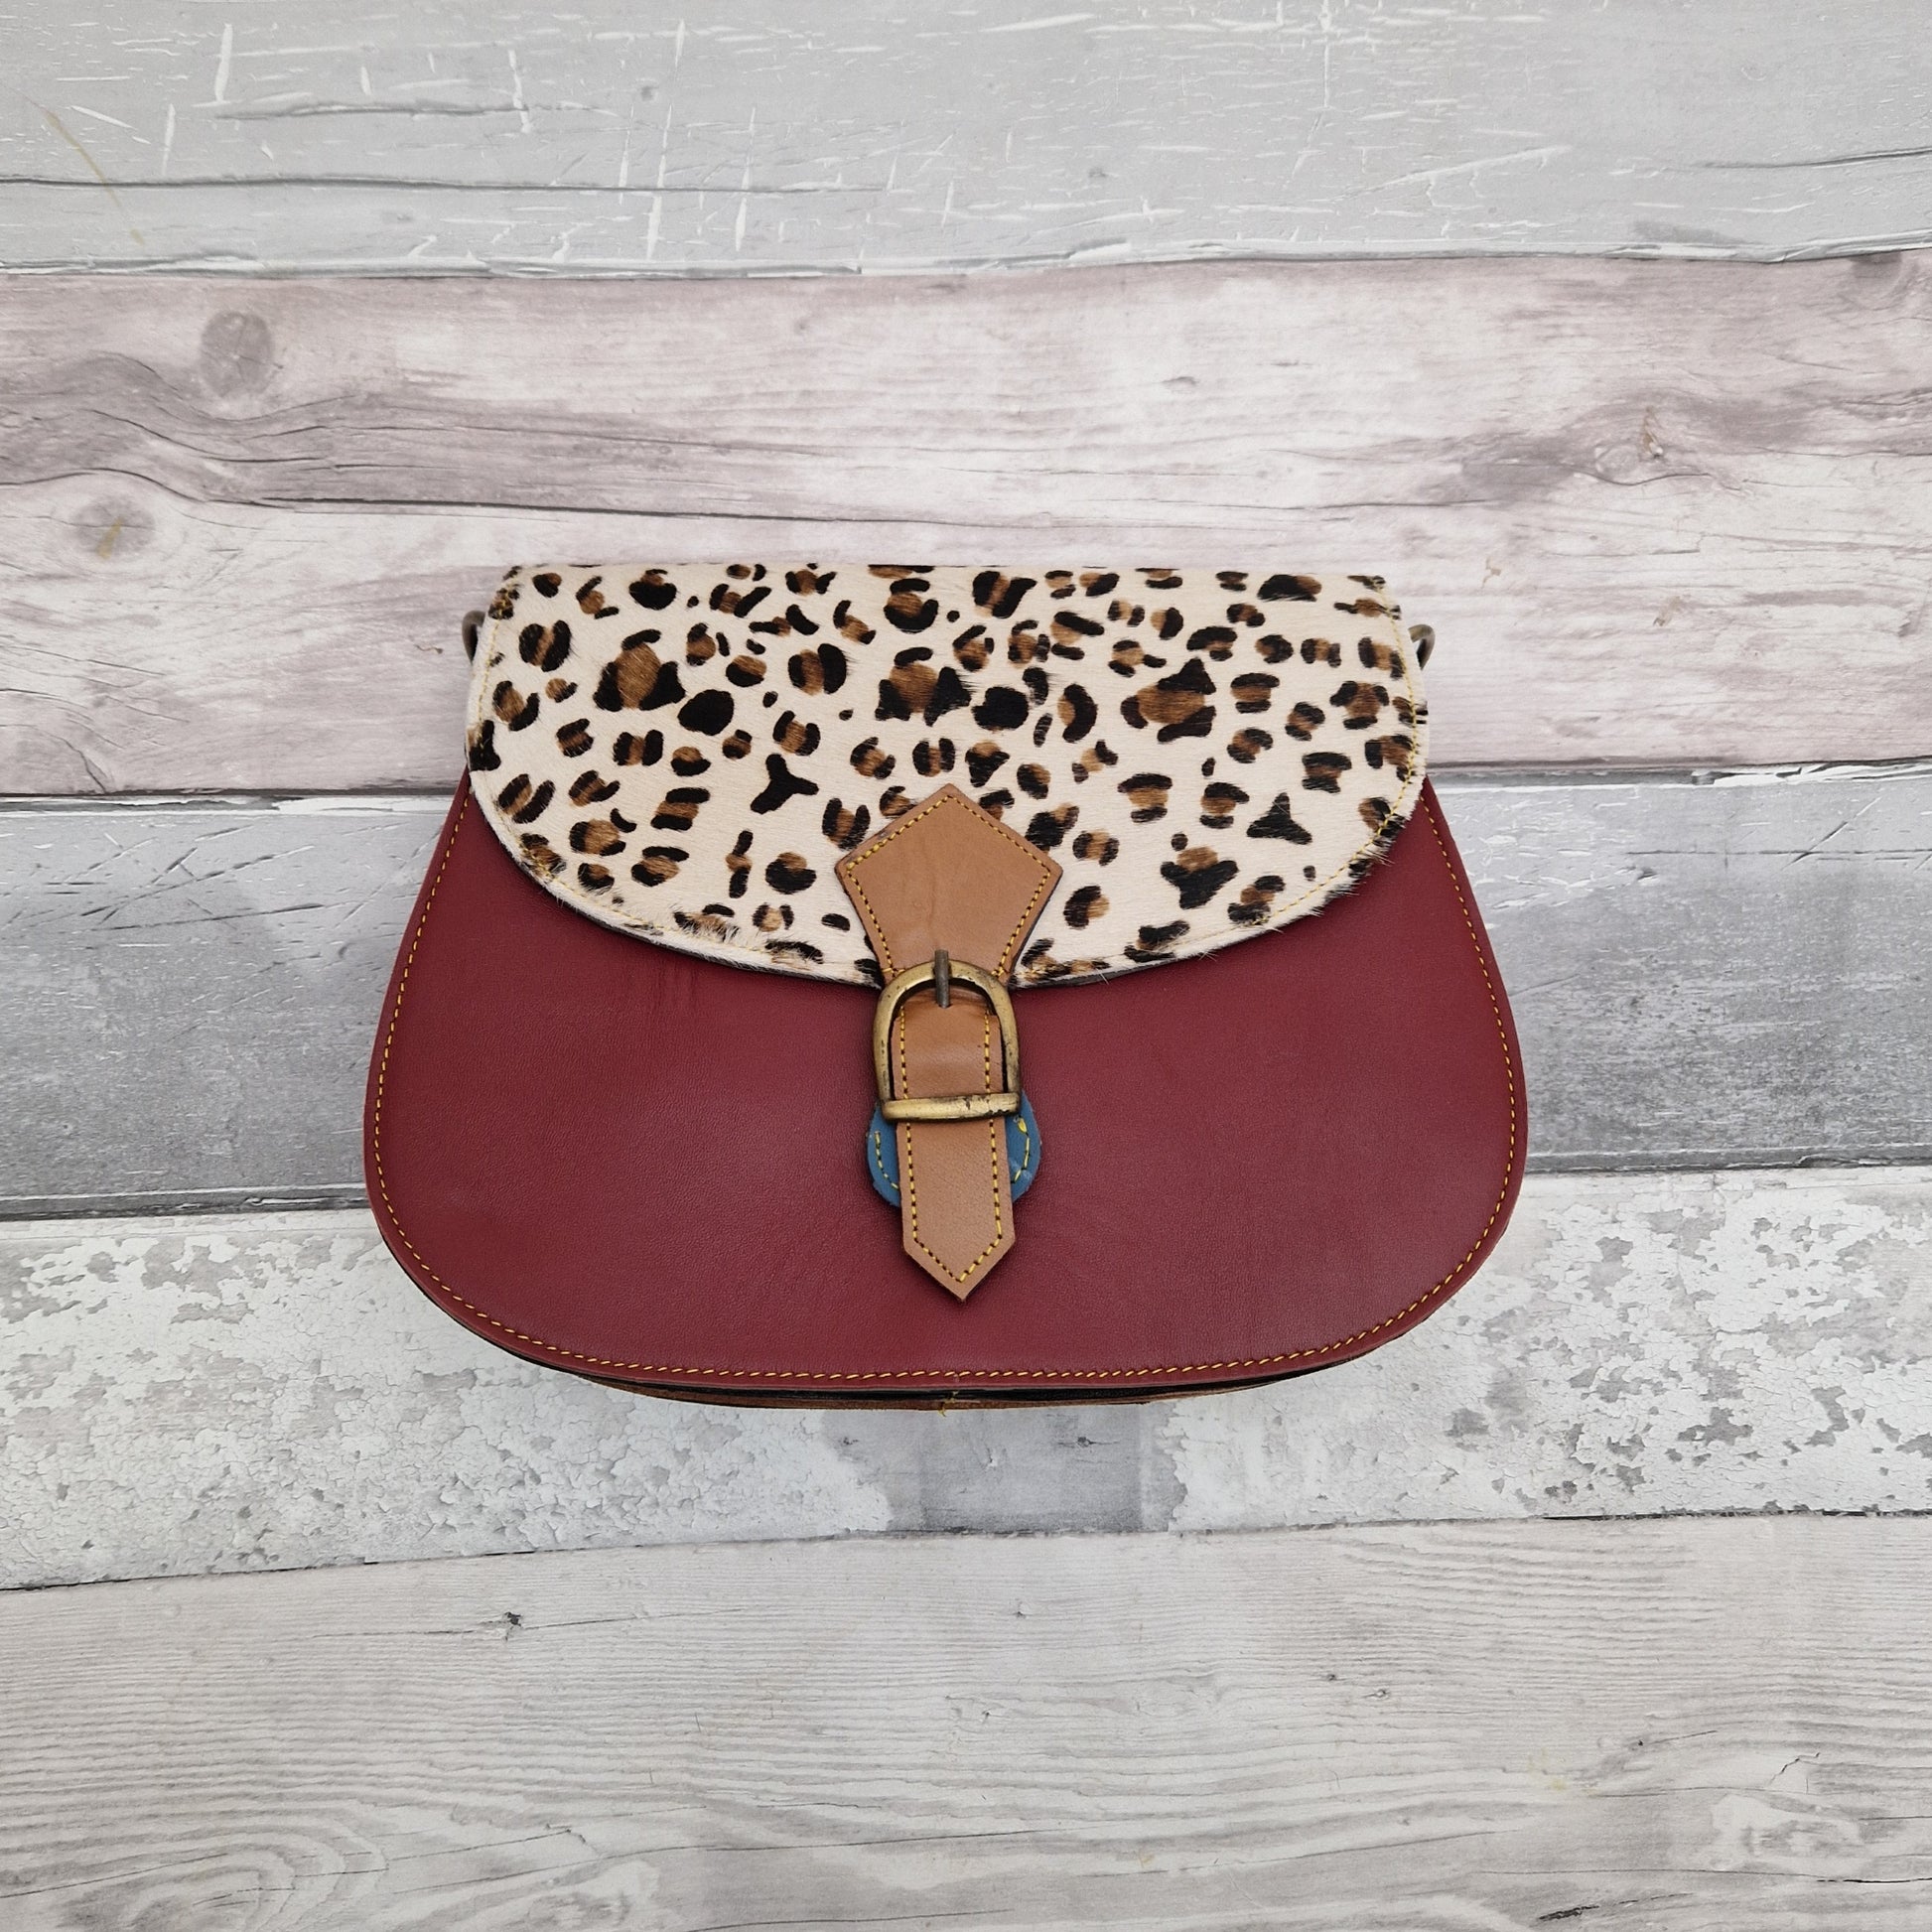 Maroon leather bag with a textured panel of leopard print.